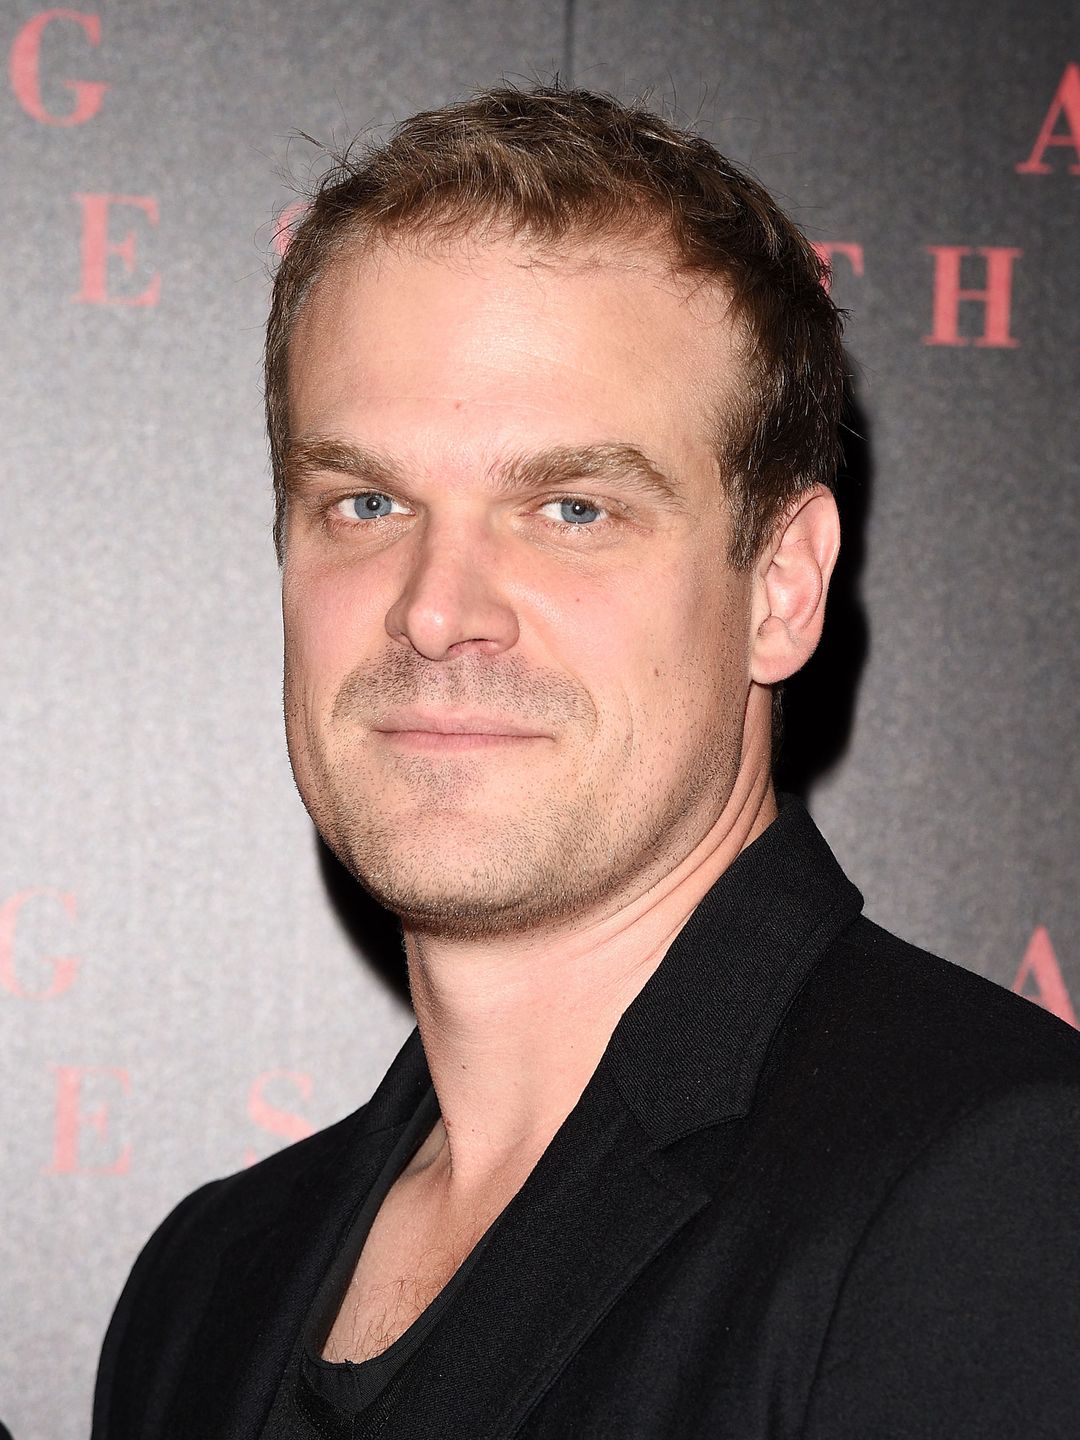 David Harbour young age